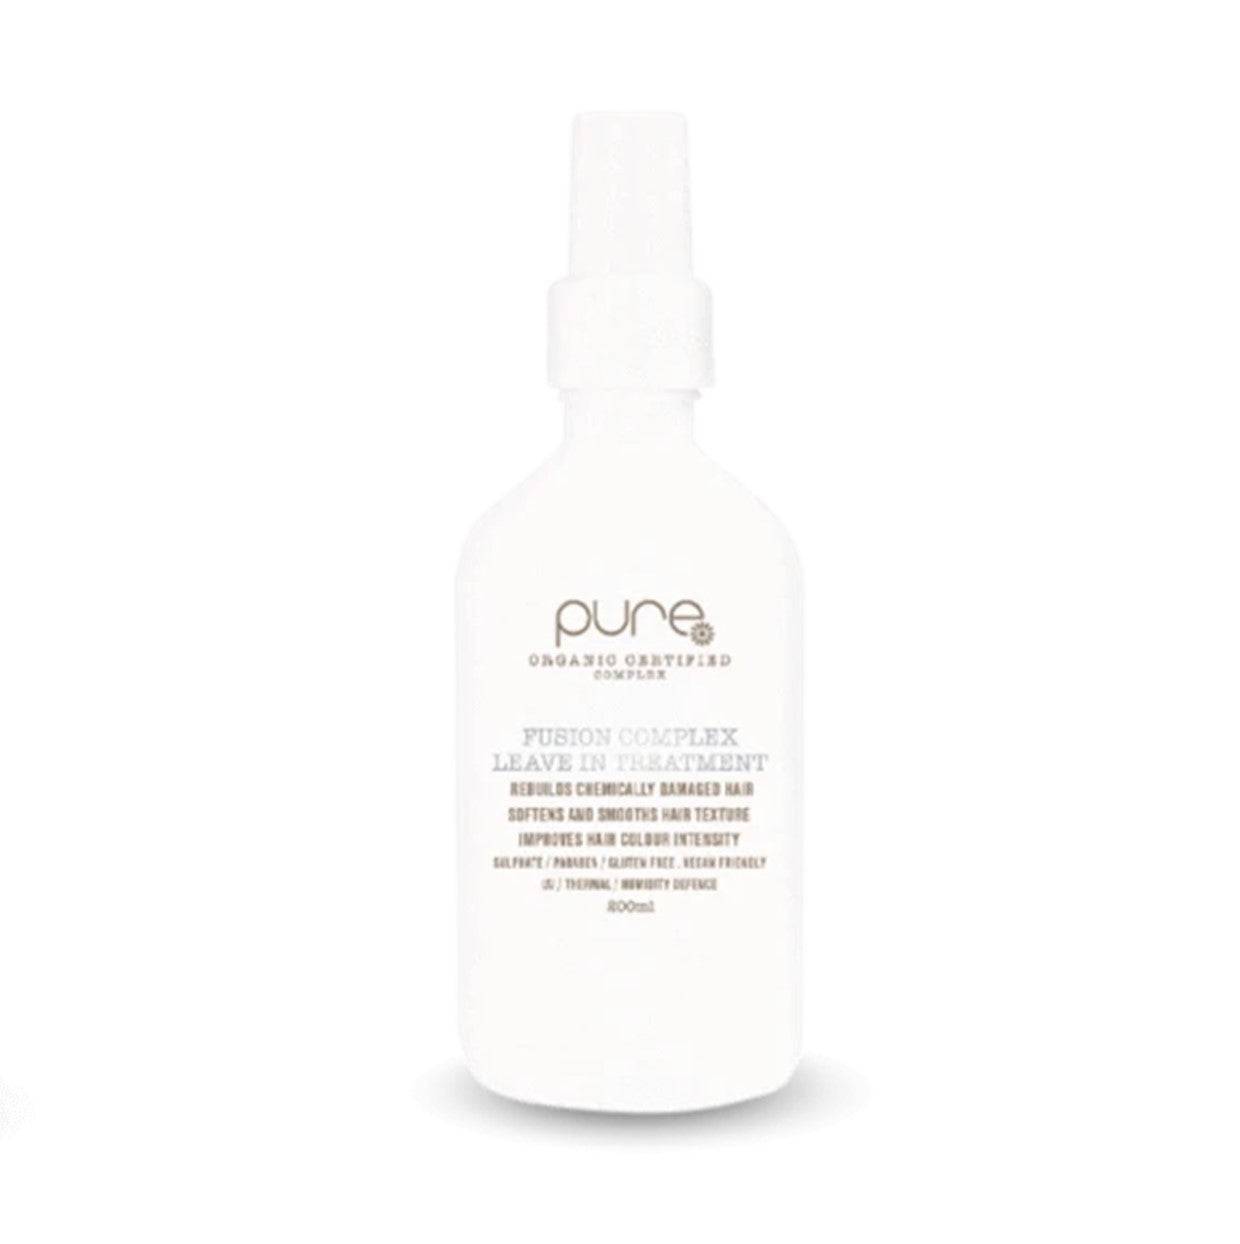 Pure Fusion Complex Leave in Treatment 200ml - On Line Hair Depot